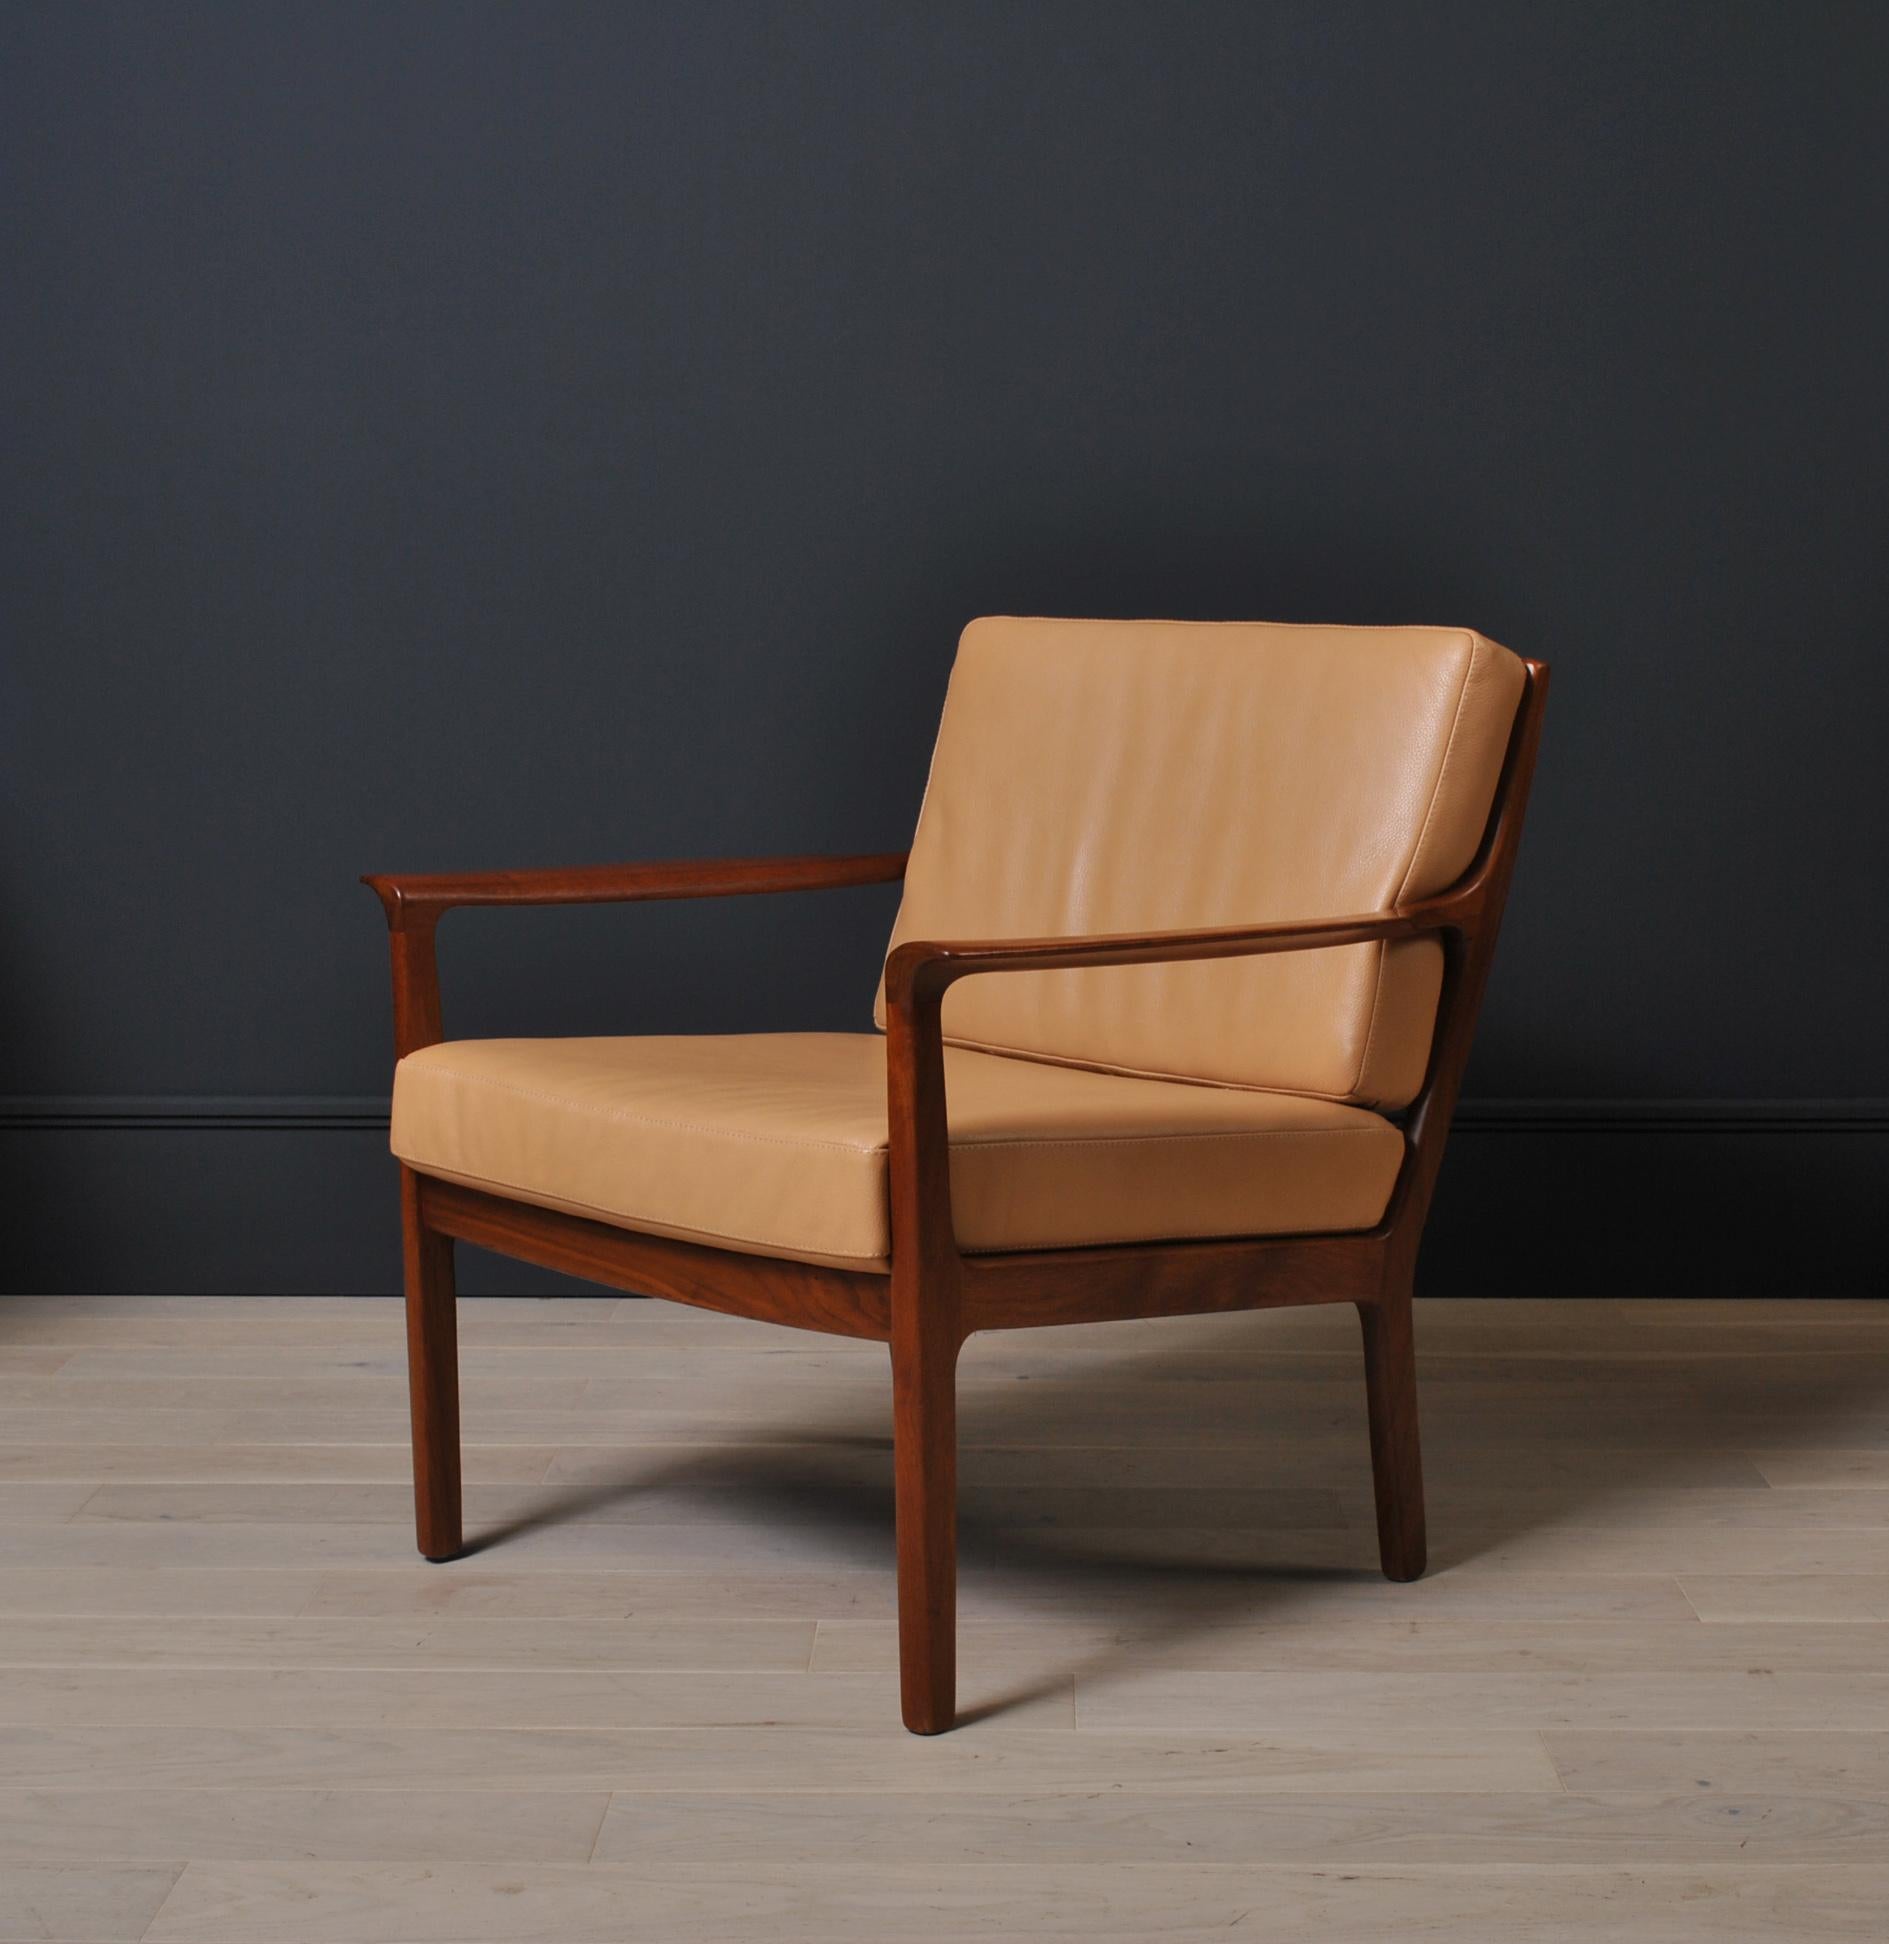 Elegant Nordic 1960’s midcentury lounge chairs constructed from rich brown teak fully reupholstered in soft tan leather. Curved sweeping sculpted arms. More available with alternative upholstery options.